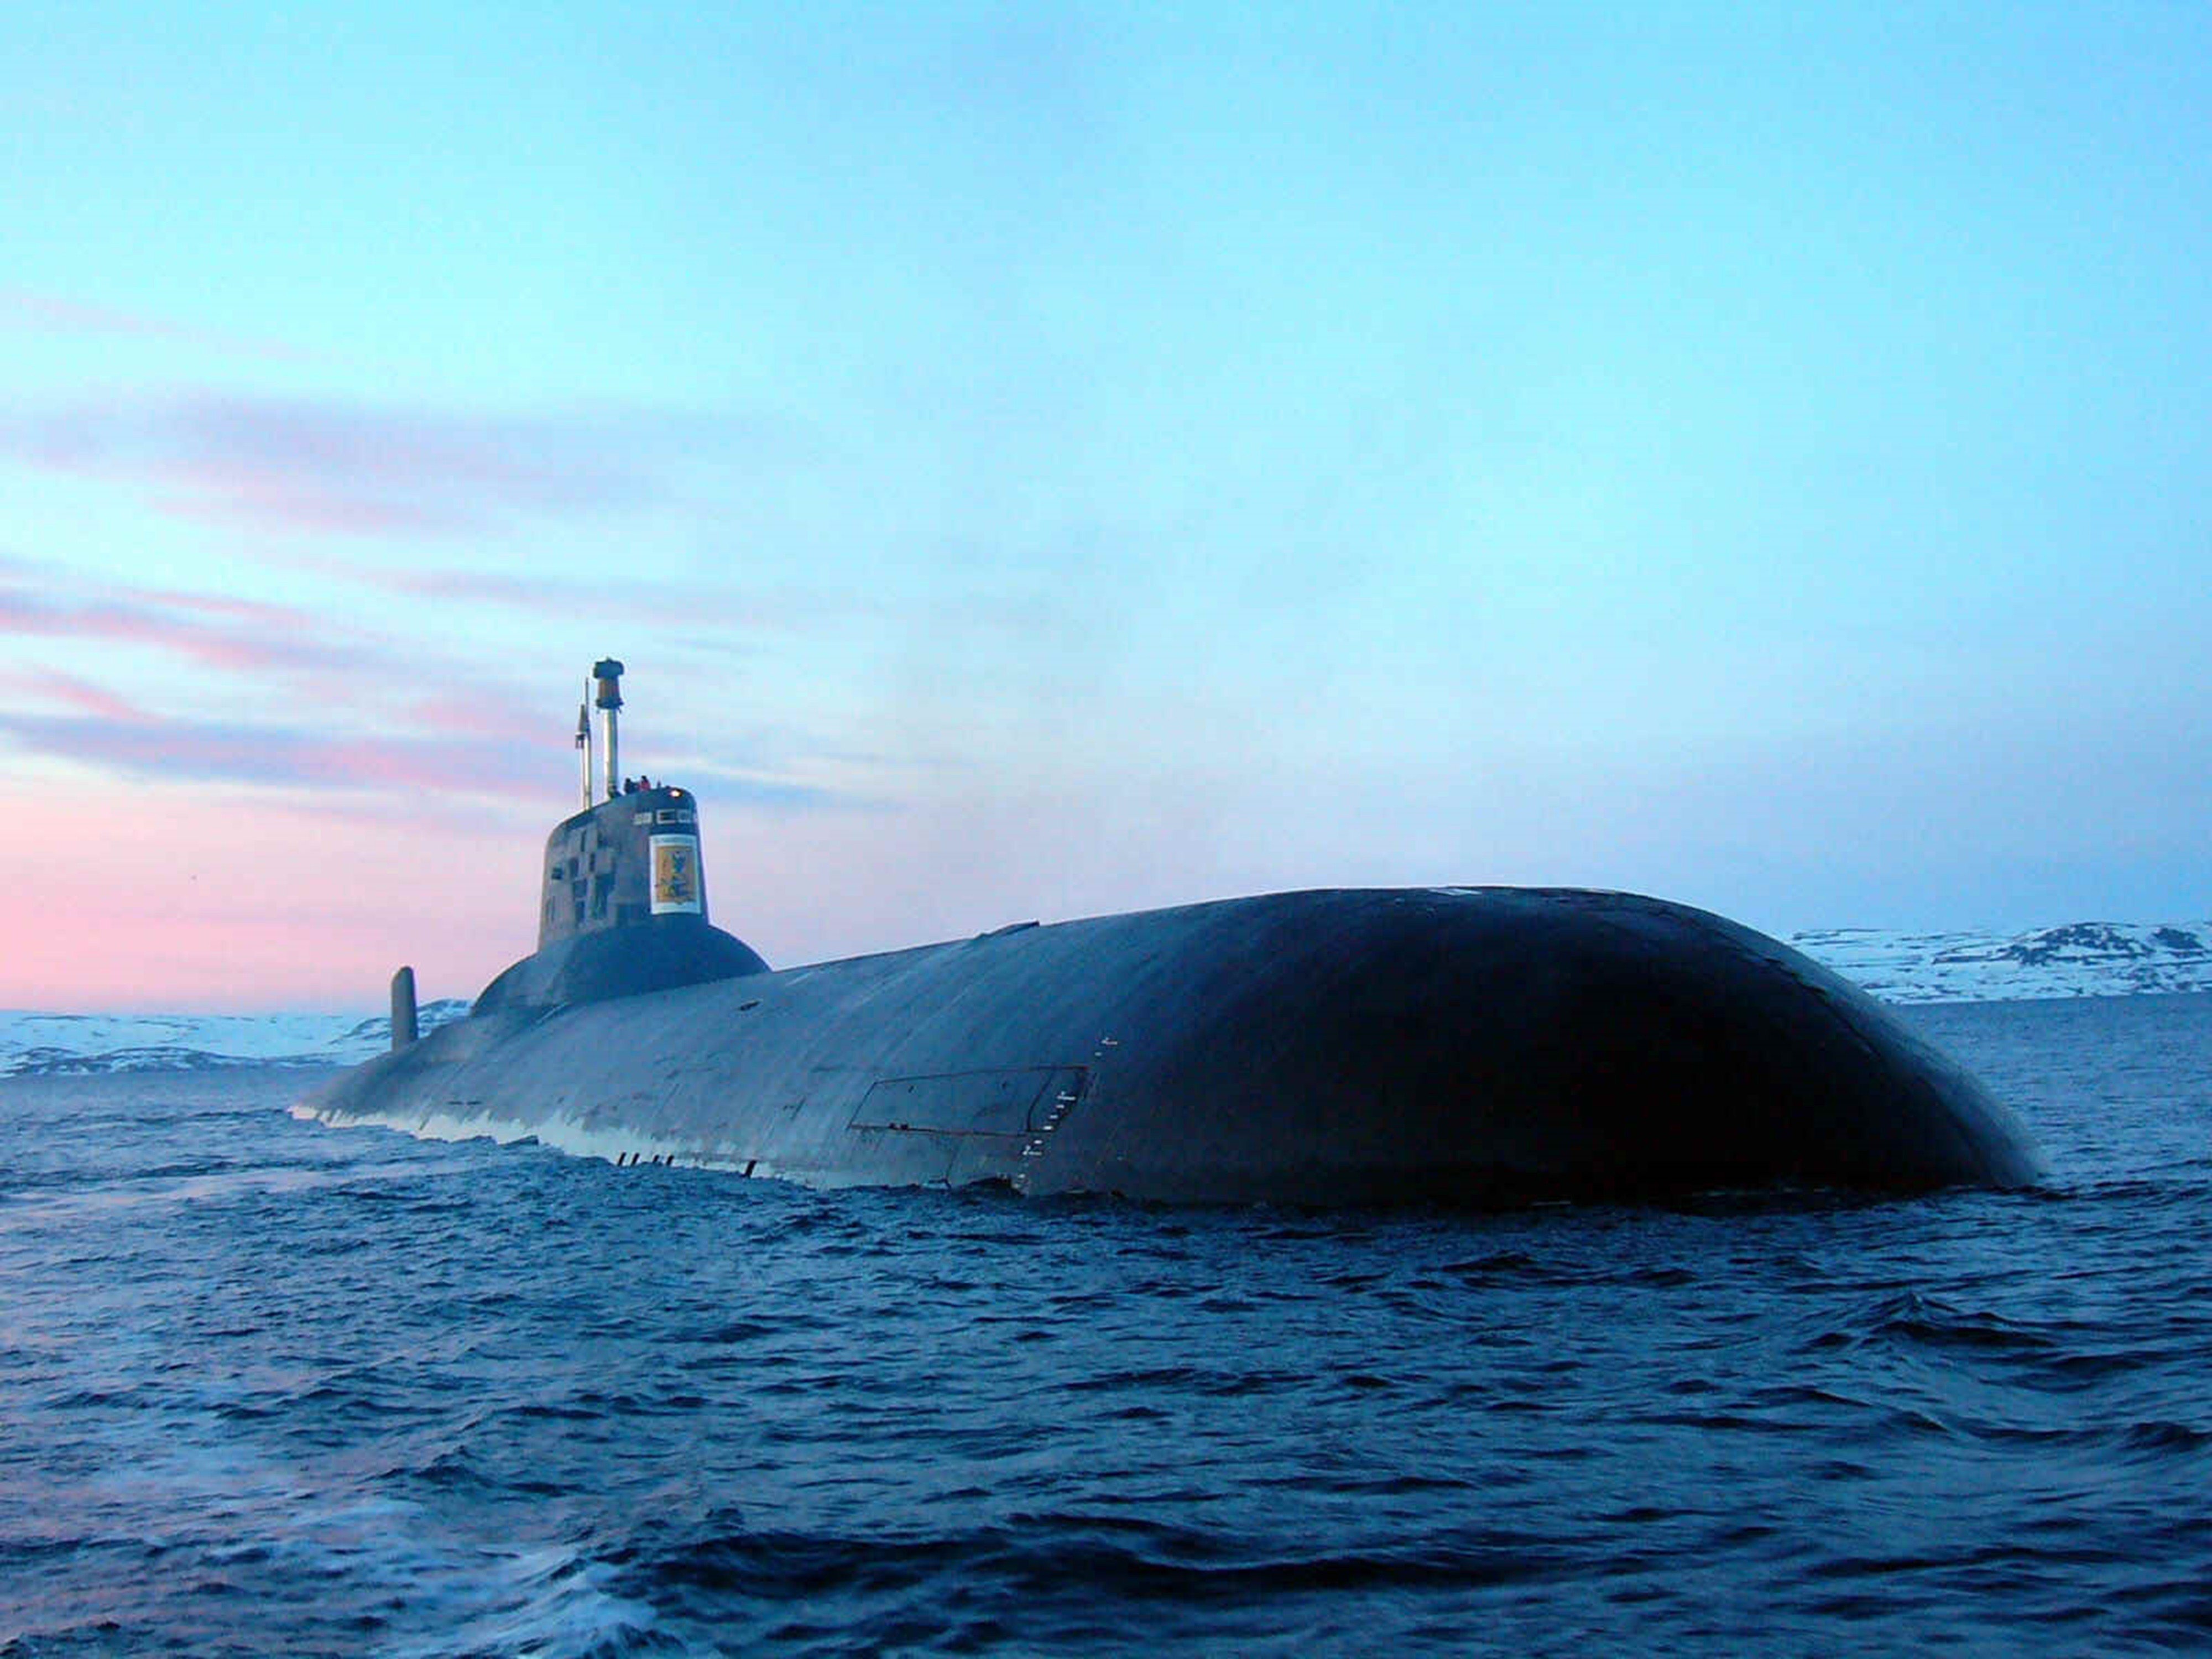 russian, Red, Star, Russia, Typhoon, Submarine, Warship, Navy, Ocean, Nuclear, 4000x3000 Wallpaper